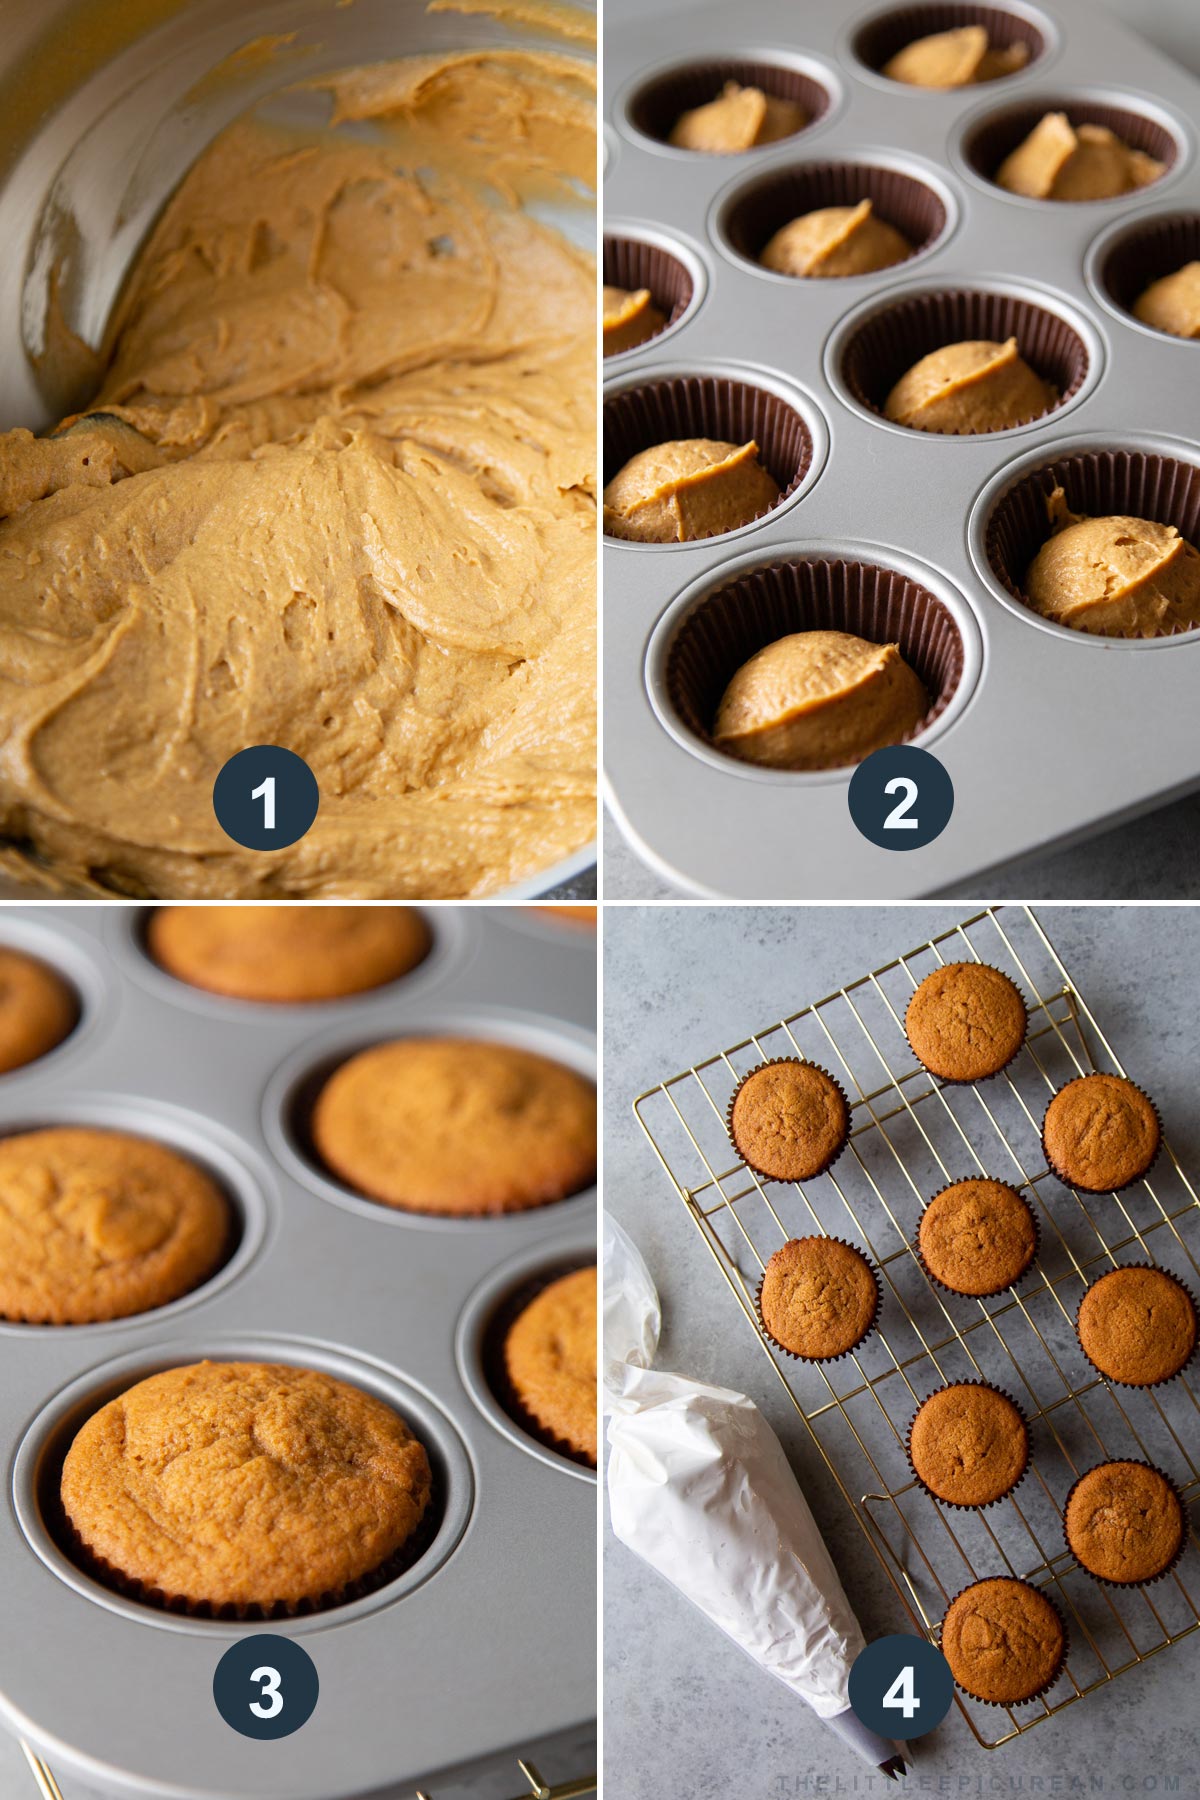 four steps showing sweet potato cupcakes from batter to cooked muffins.